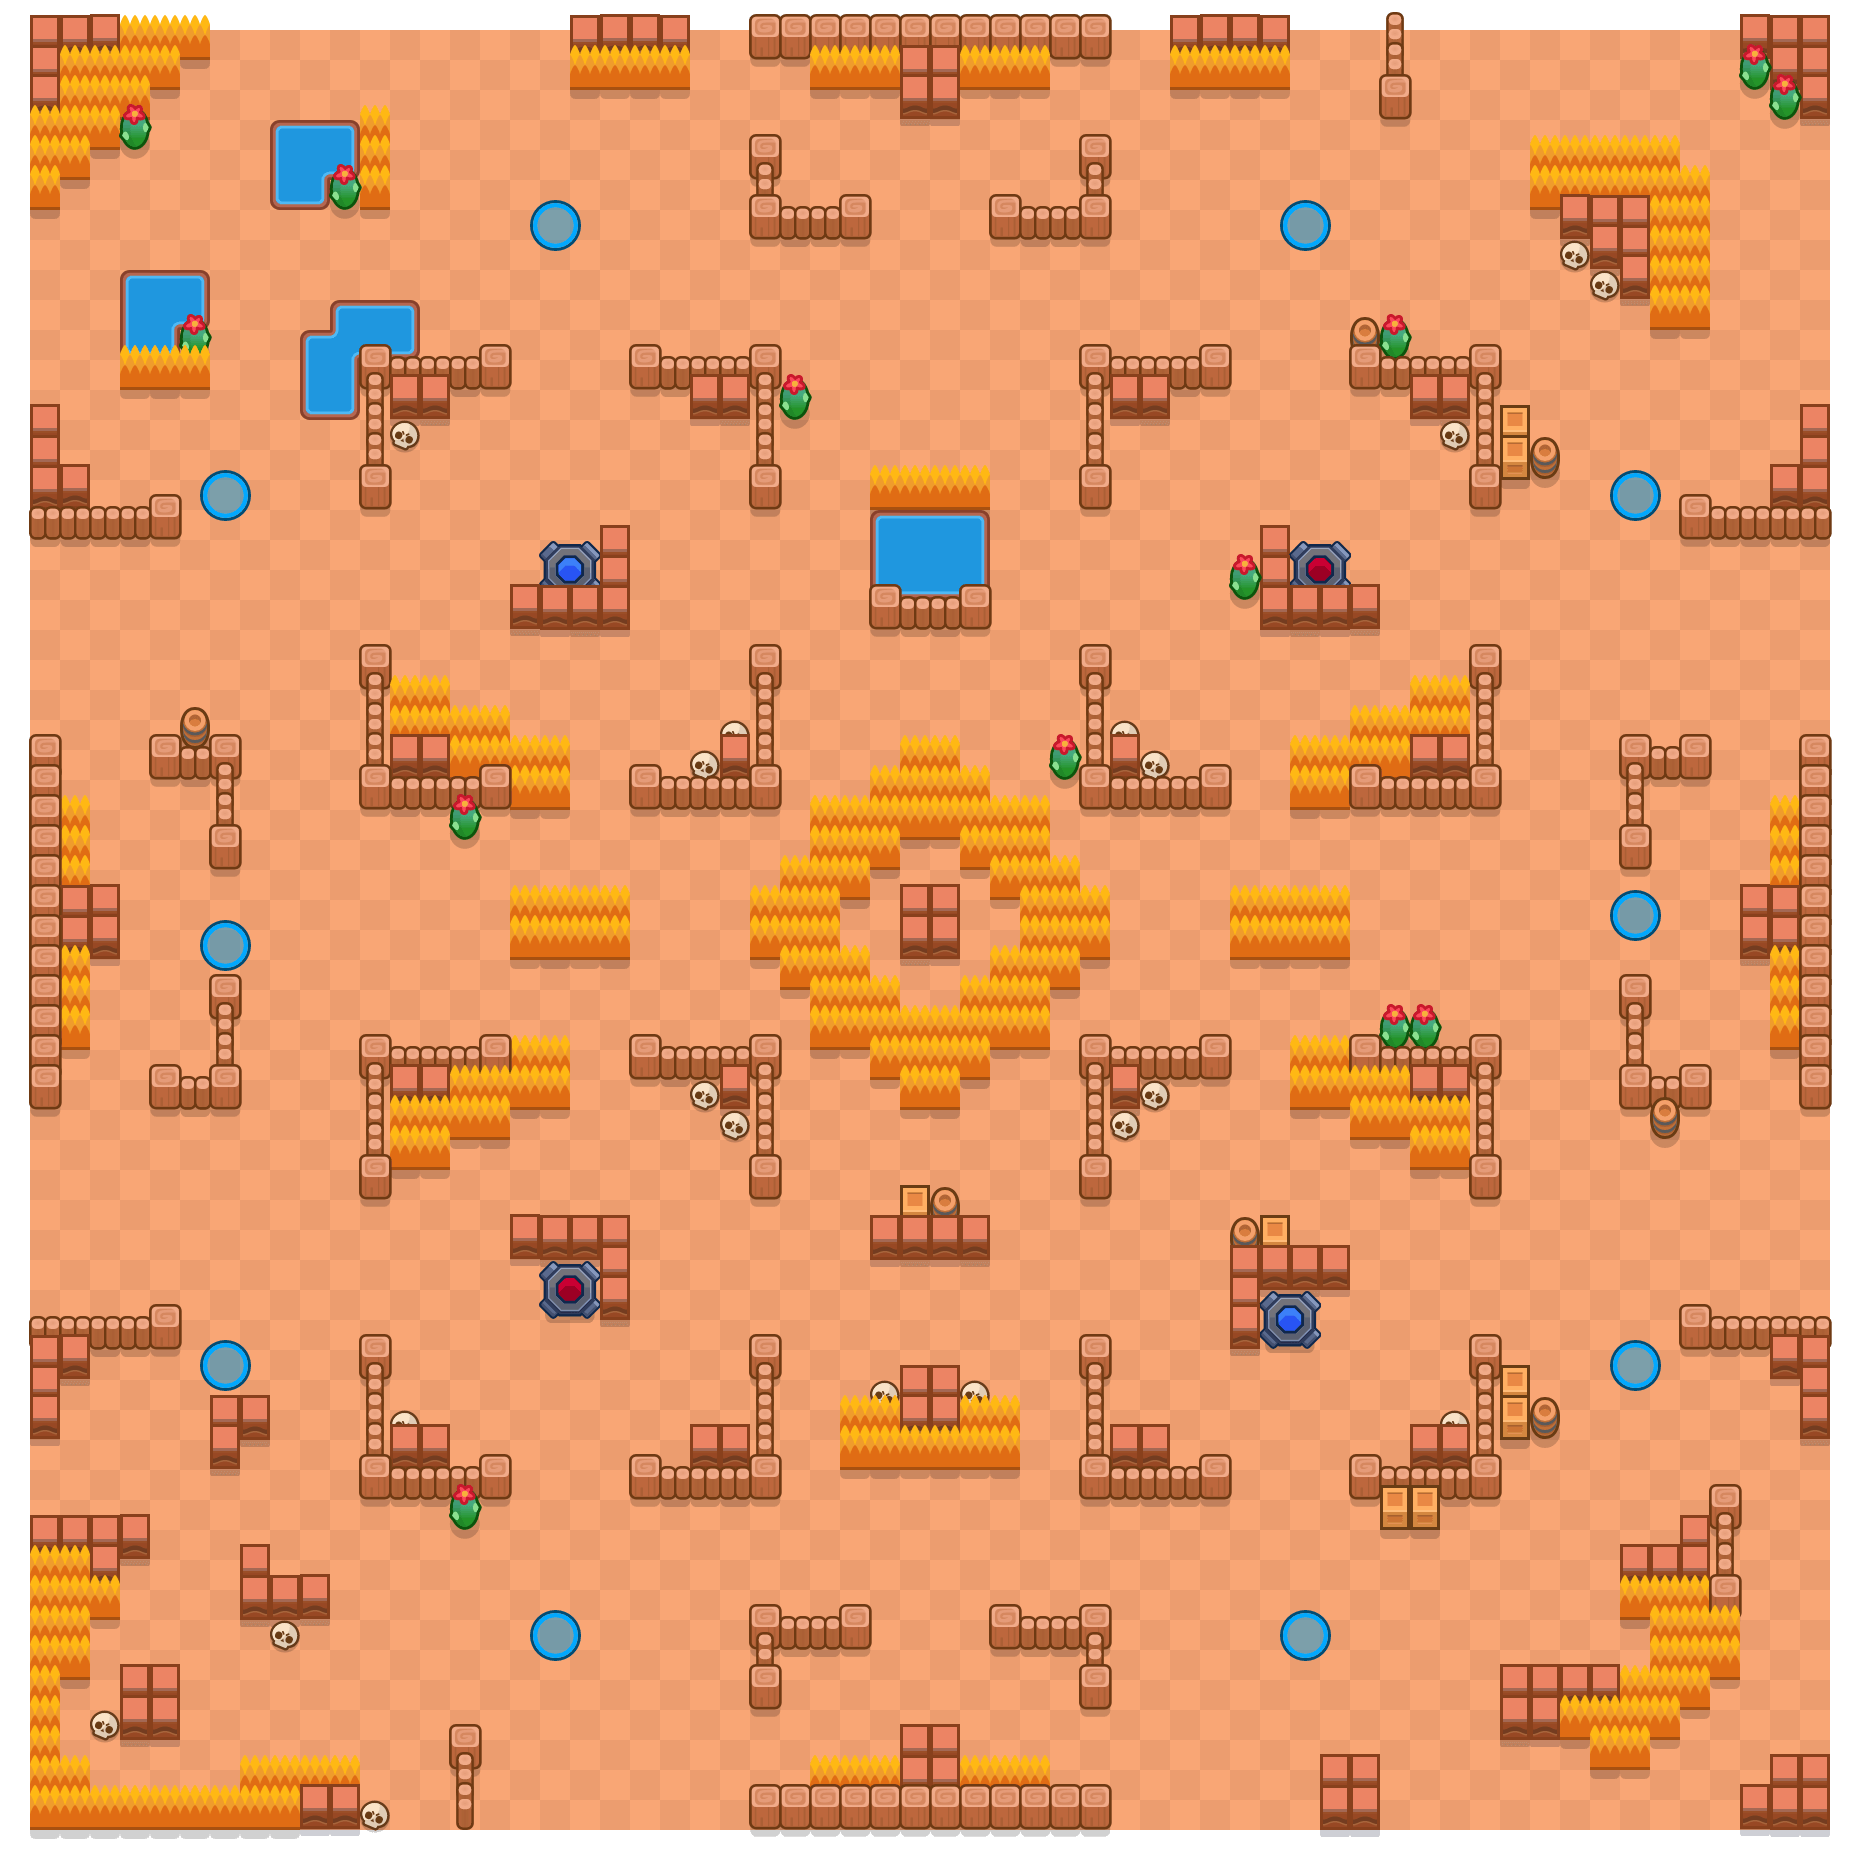 Schnell und rastlos is a Jäger Brawl Stars map. Check out Schnell und rastlos's map picture for Jäger and the best and recommended brawlers in Brawl Stars.